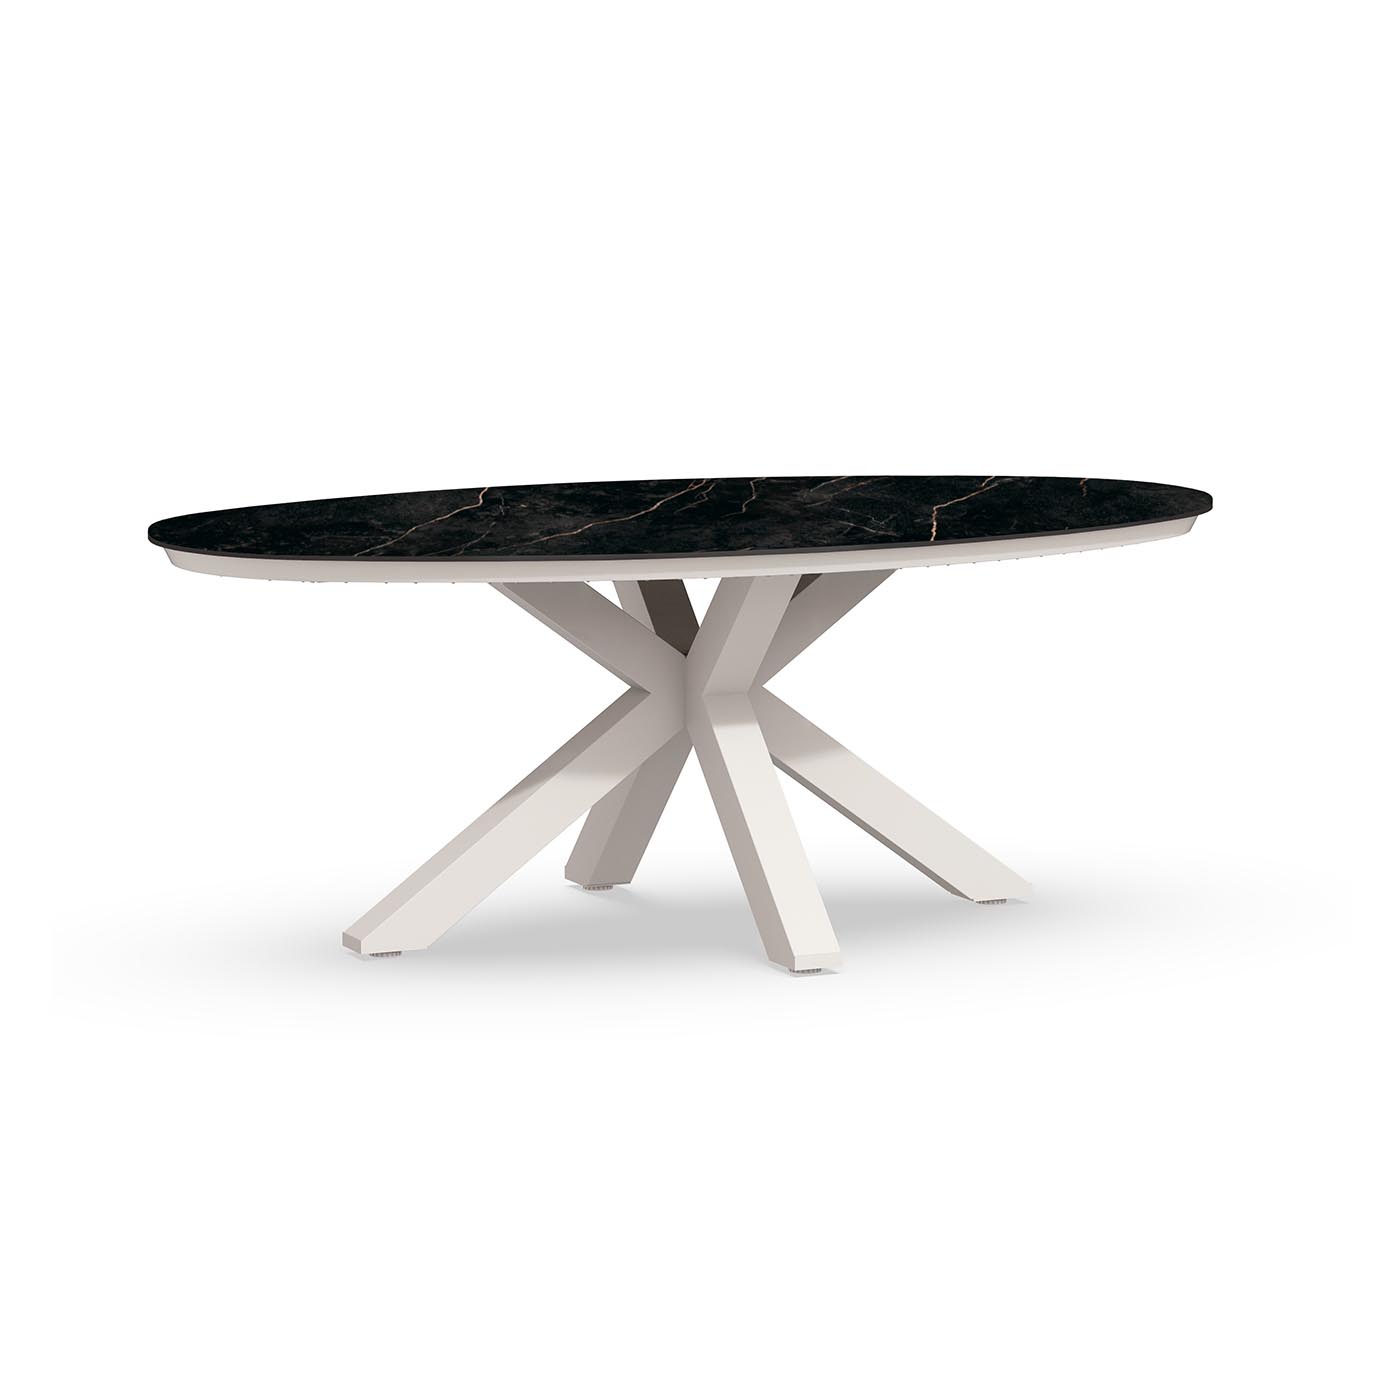 Oblong Dining Table Trespa Marble 200 x 110 cm Creme White